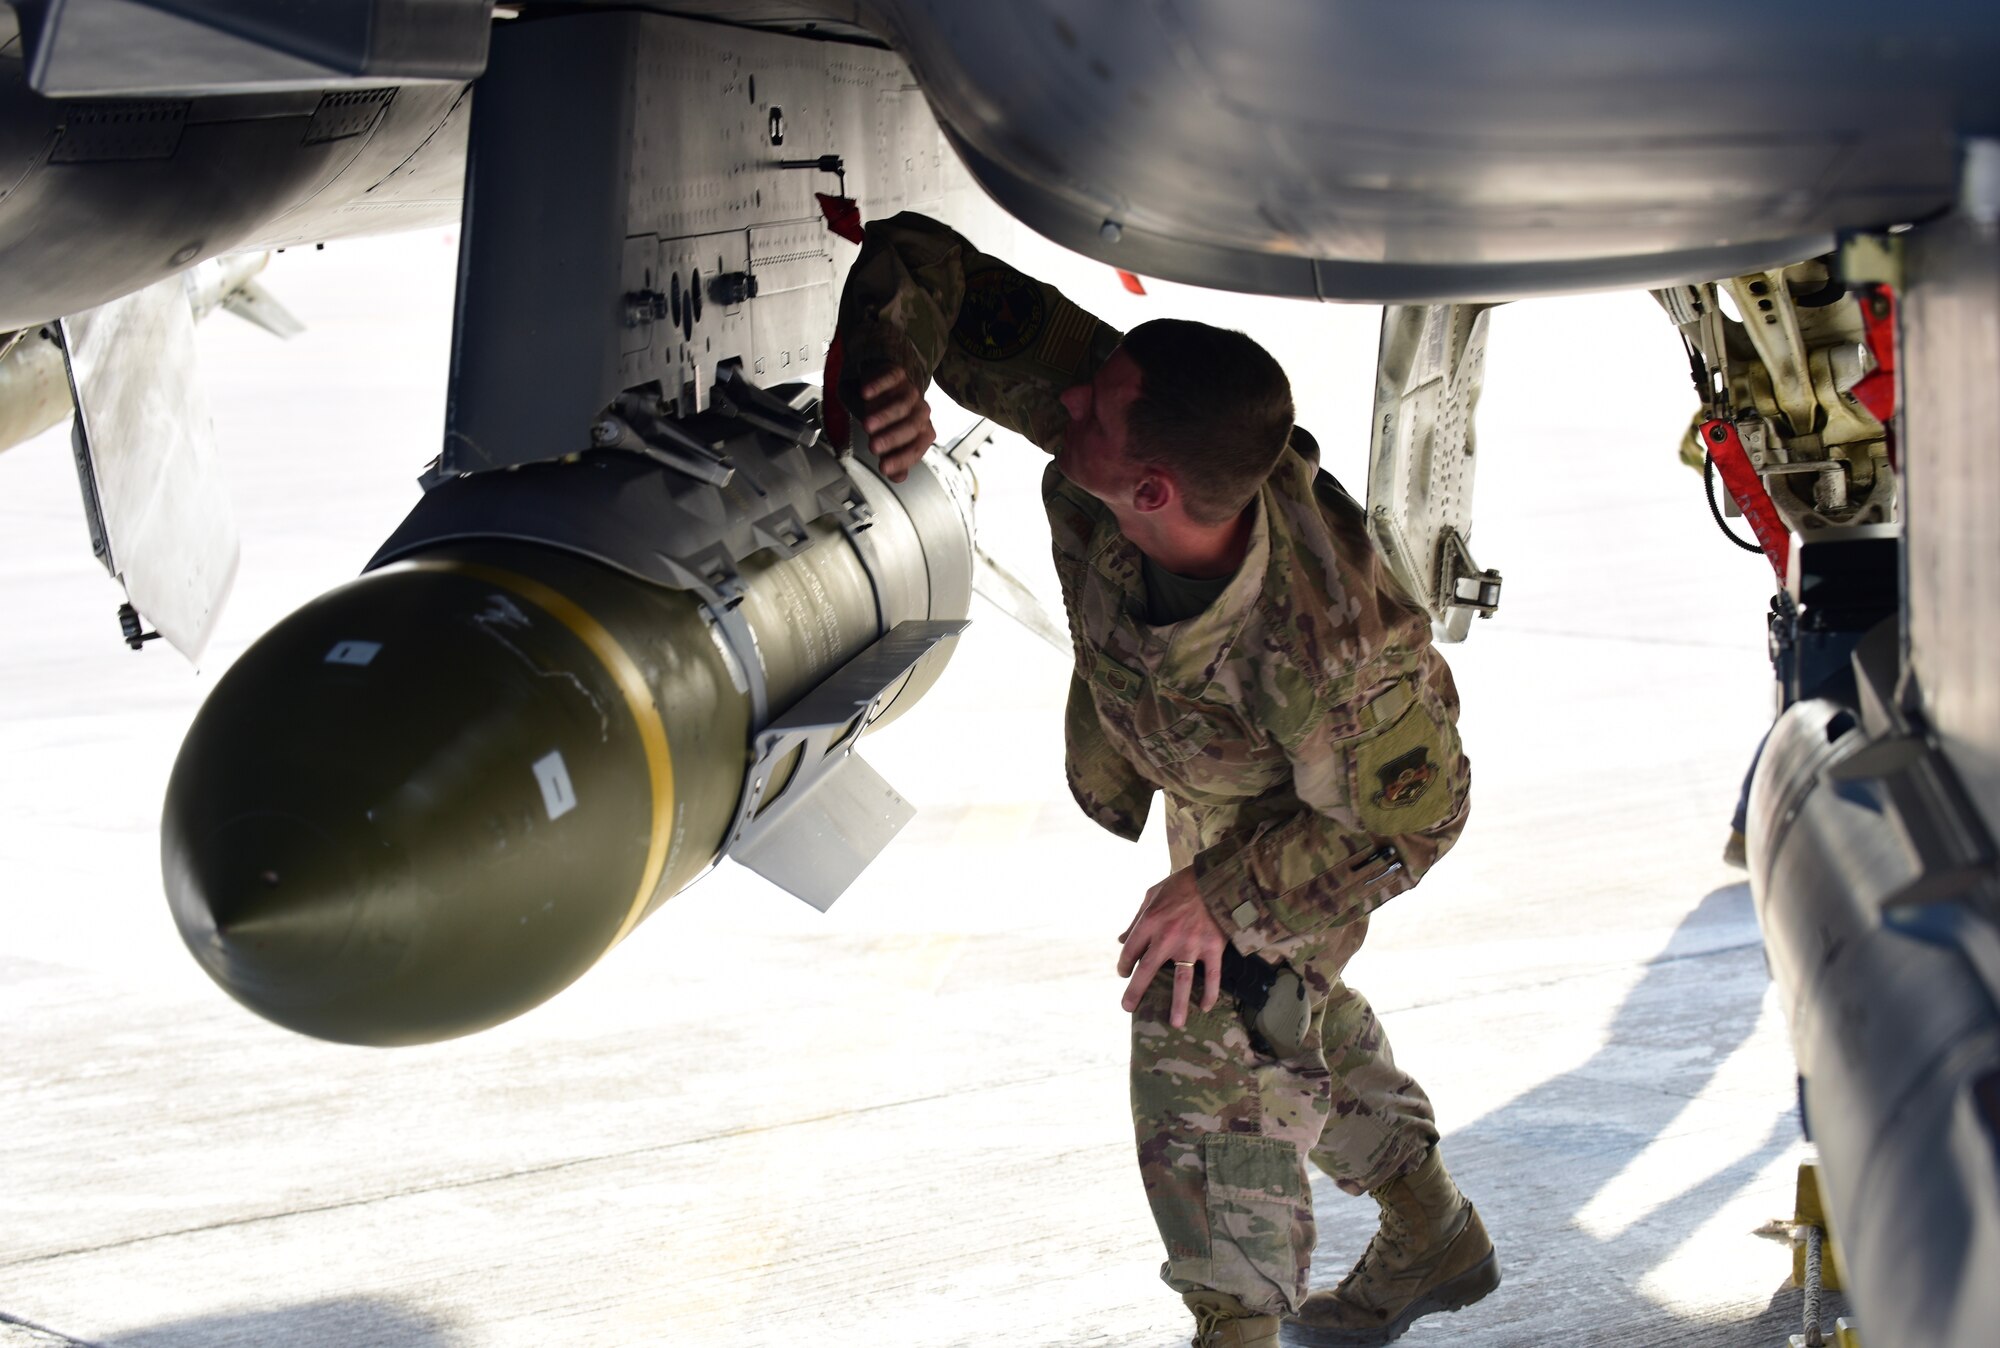 U.S. Air Force Master Sgt. Nathaniel Powers, munitions team lead with the 378th Expeditionary Maintenance Squadron, conducts an inspection of the armaments on an F-15E Strike Eagle at Prince Sultan Air Base, Kingdom of Saudi Arabia, Jan. 4, 2020.